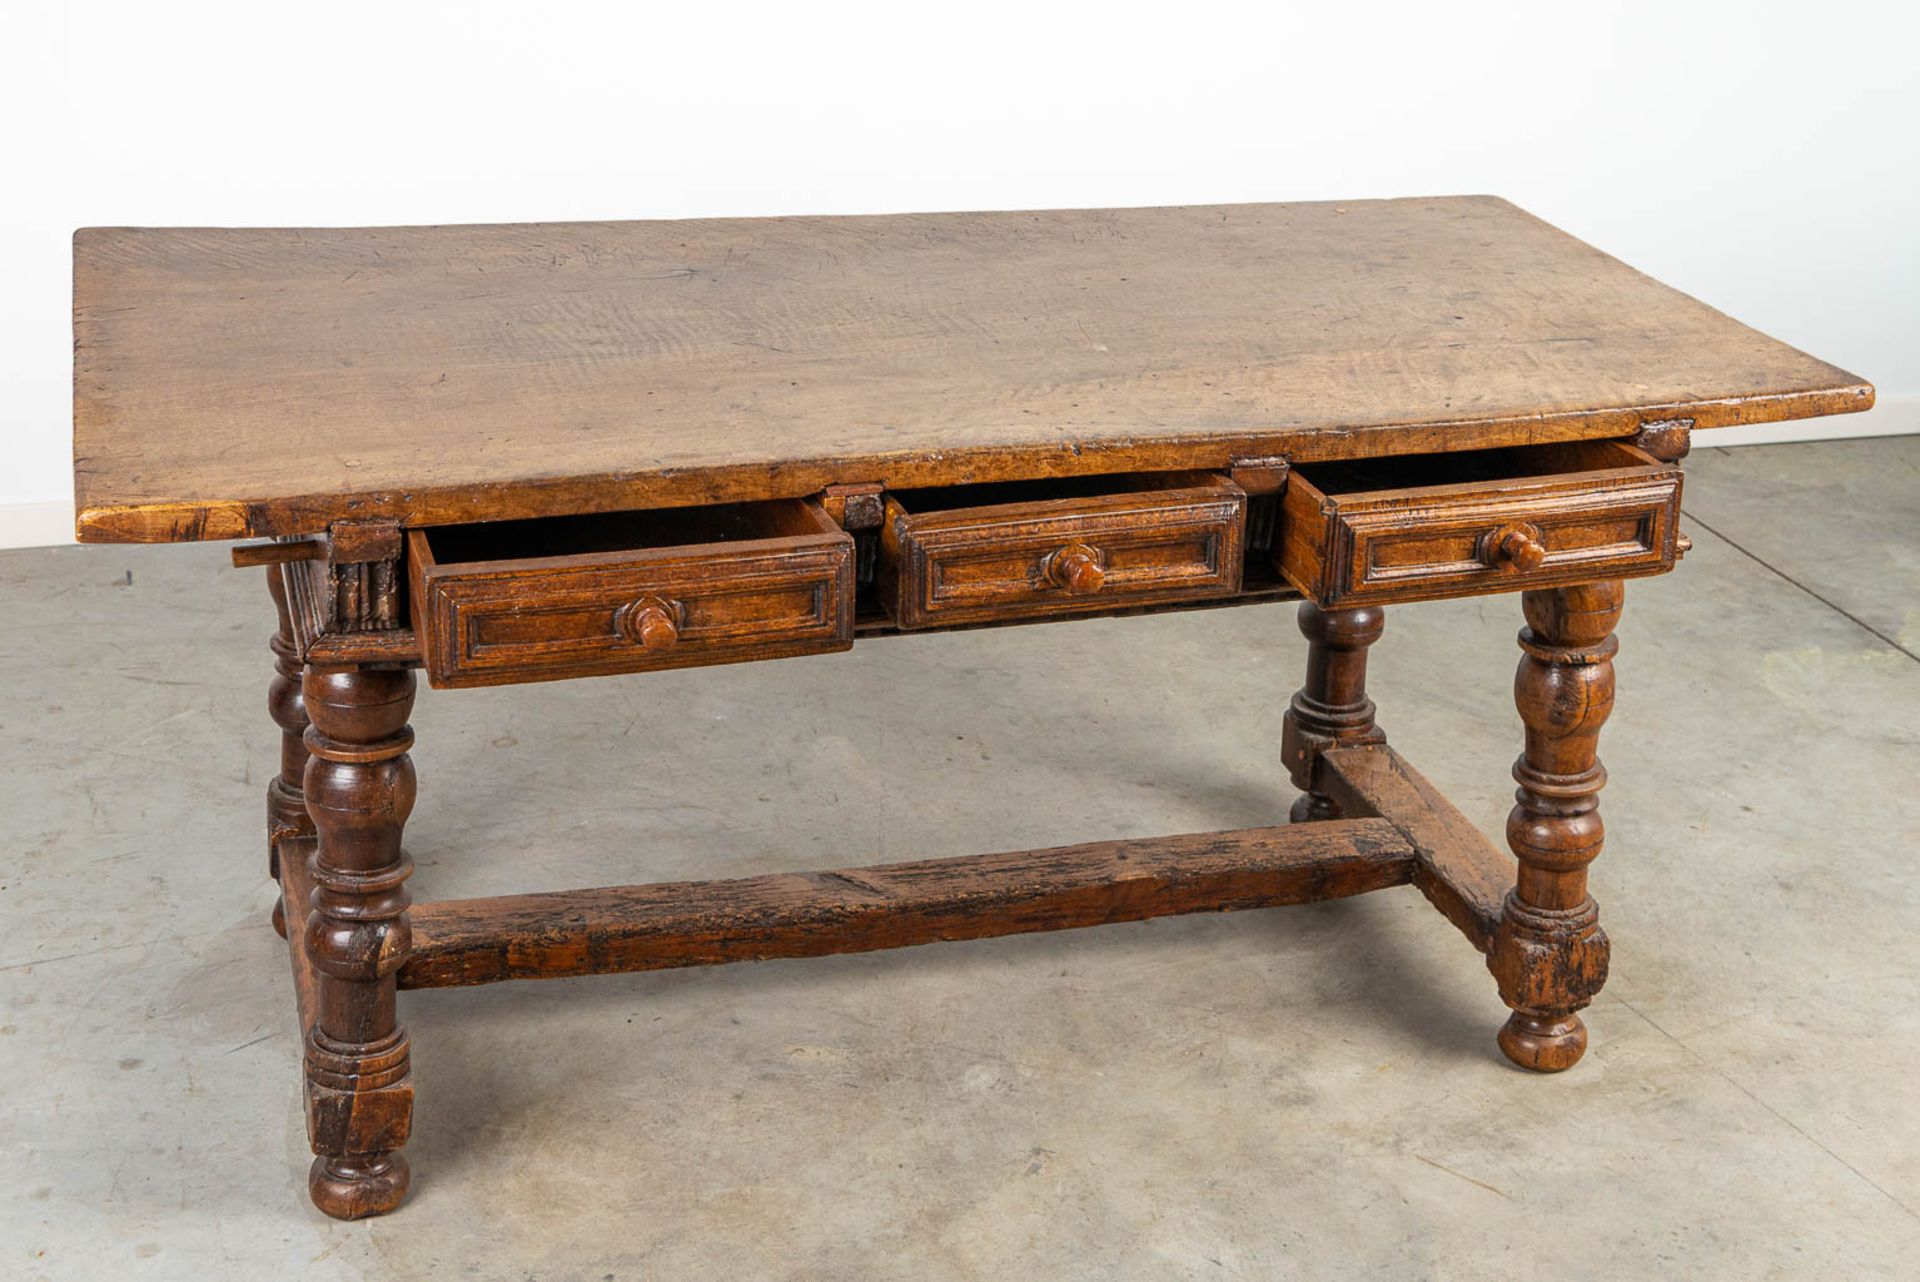 An antique table with 6 drawers, made during the 17th century. - Image 6 of 12